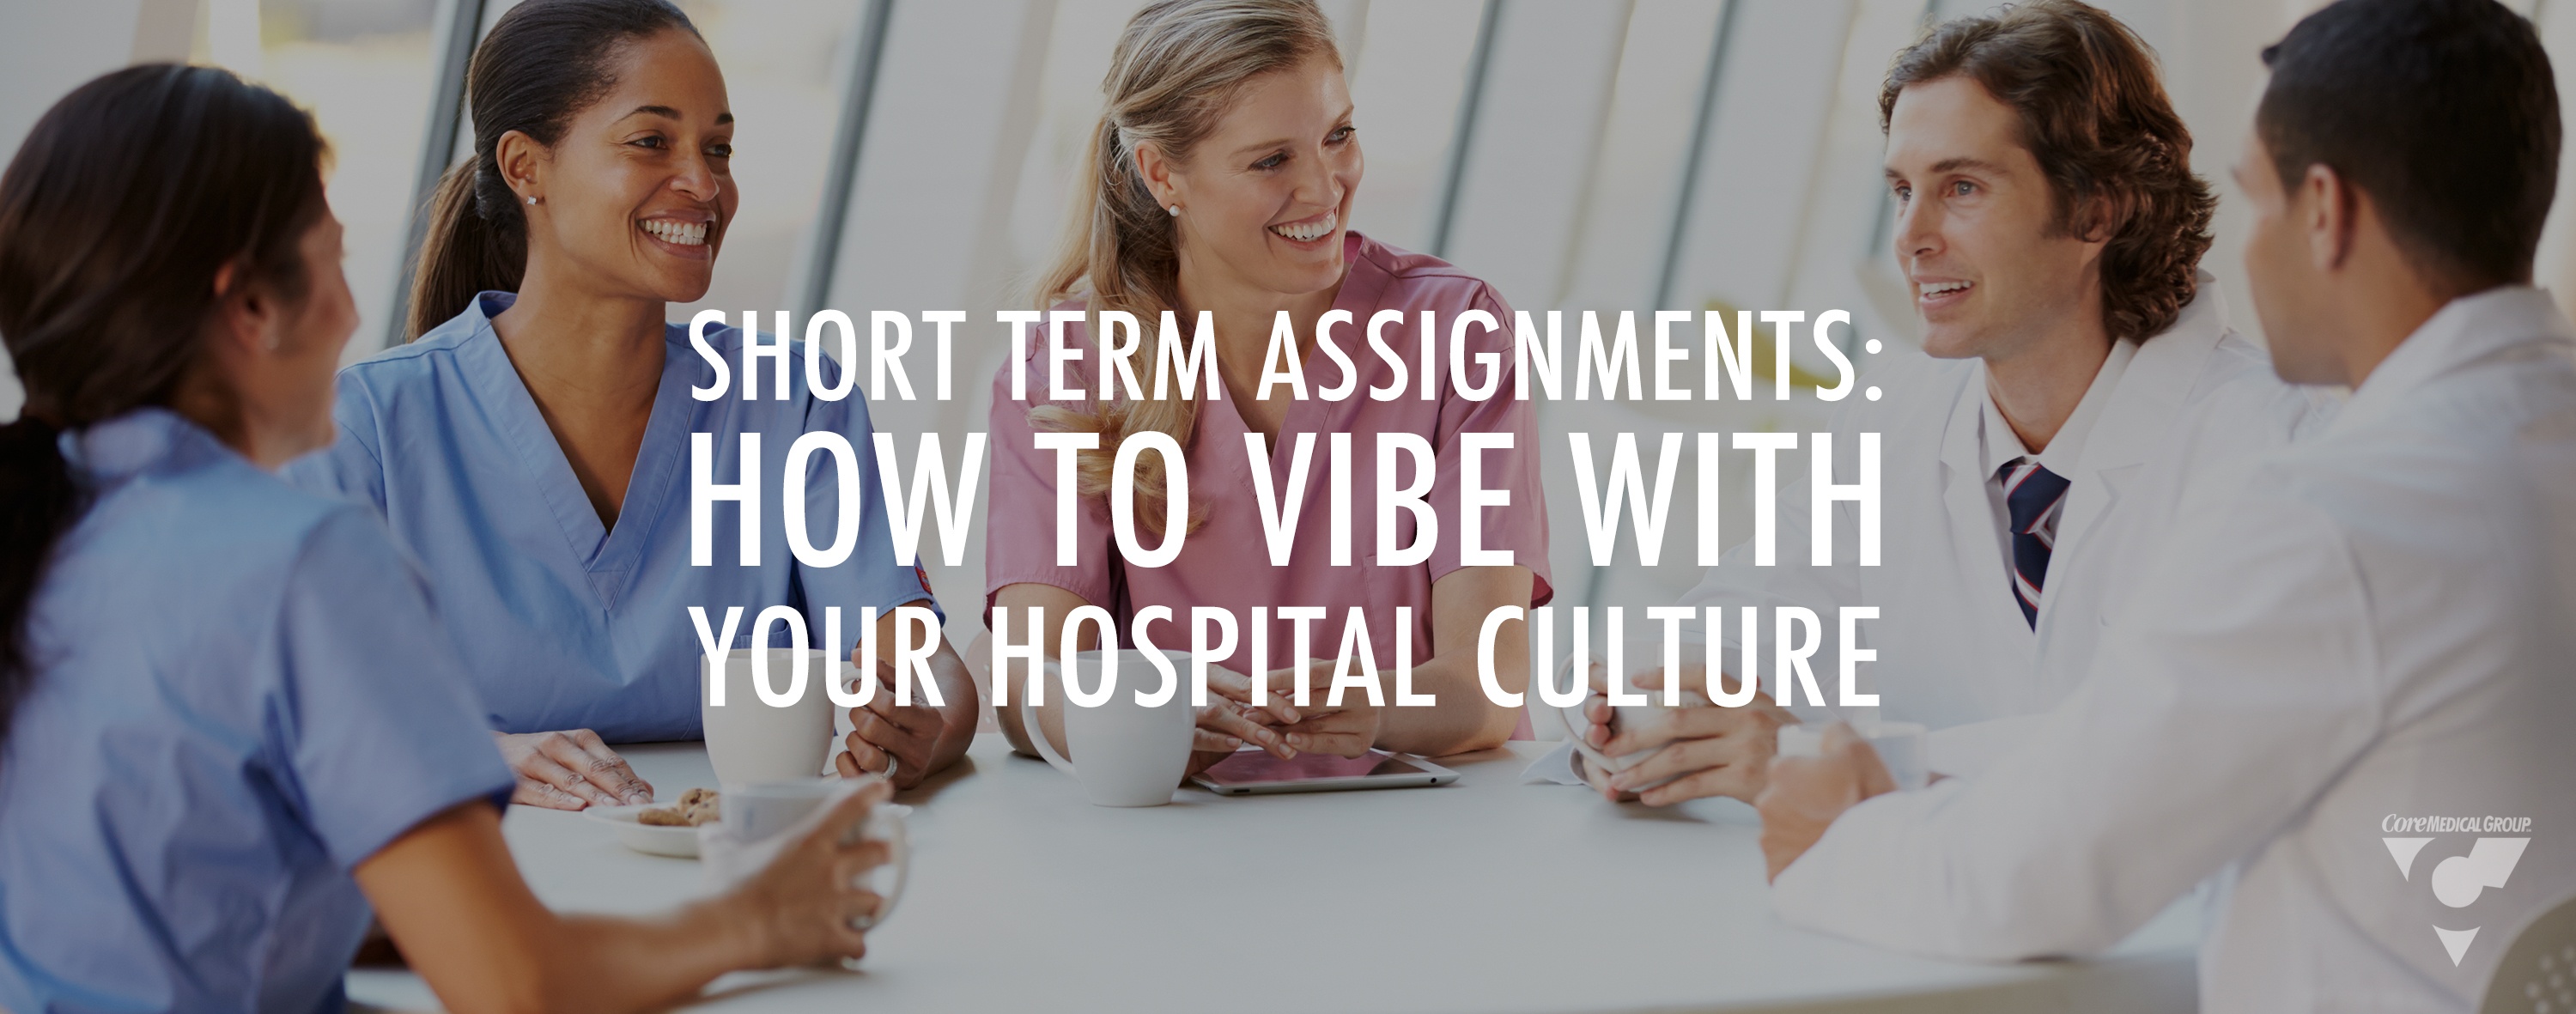 aort term asignments how to vibe with your hospital culture